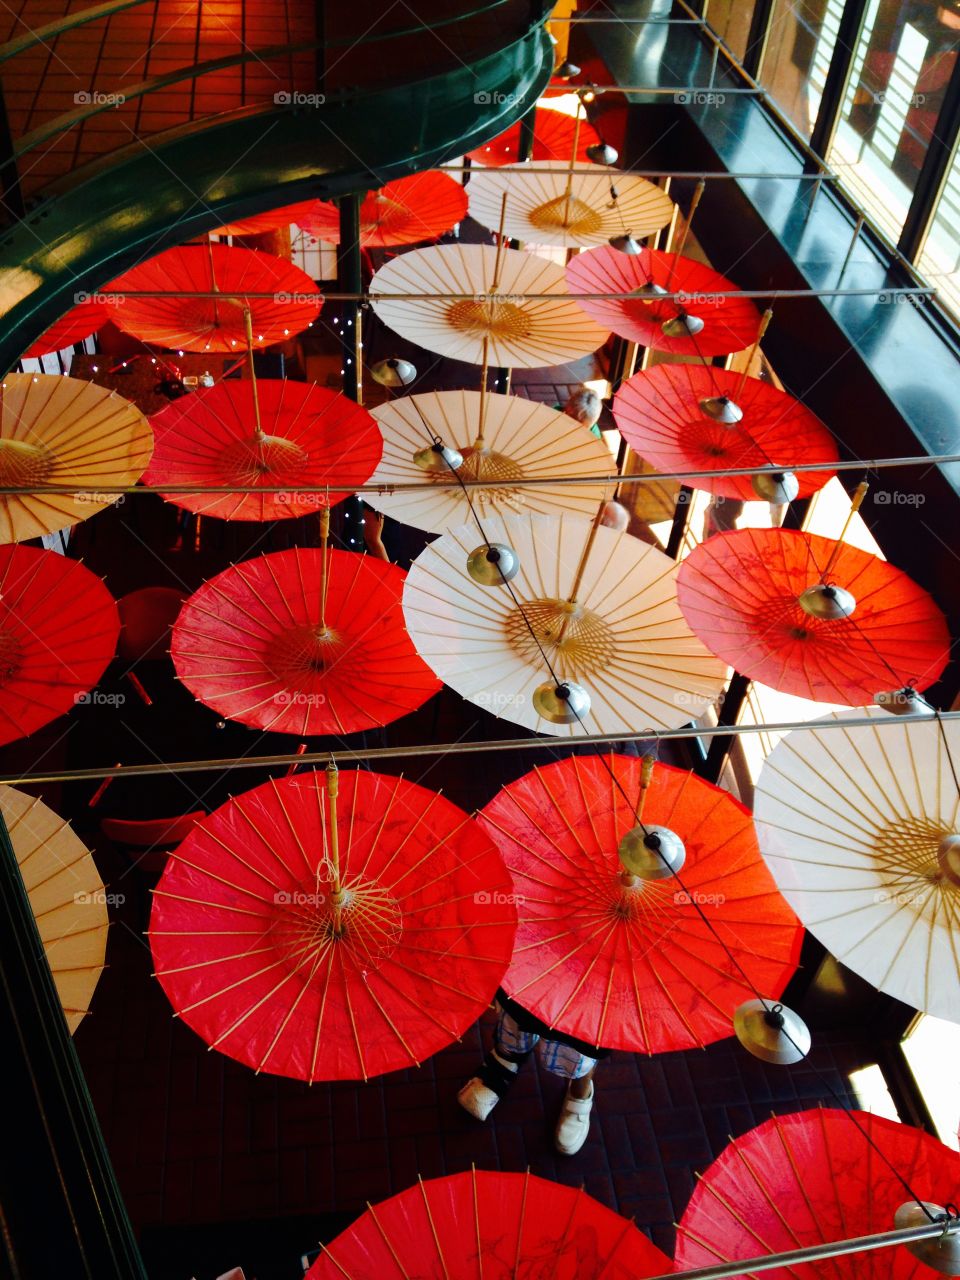 Umbrellas . Aerial view of a sushi bar from an eclectic shopping mall. 